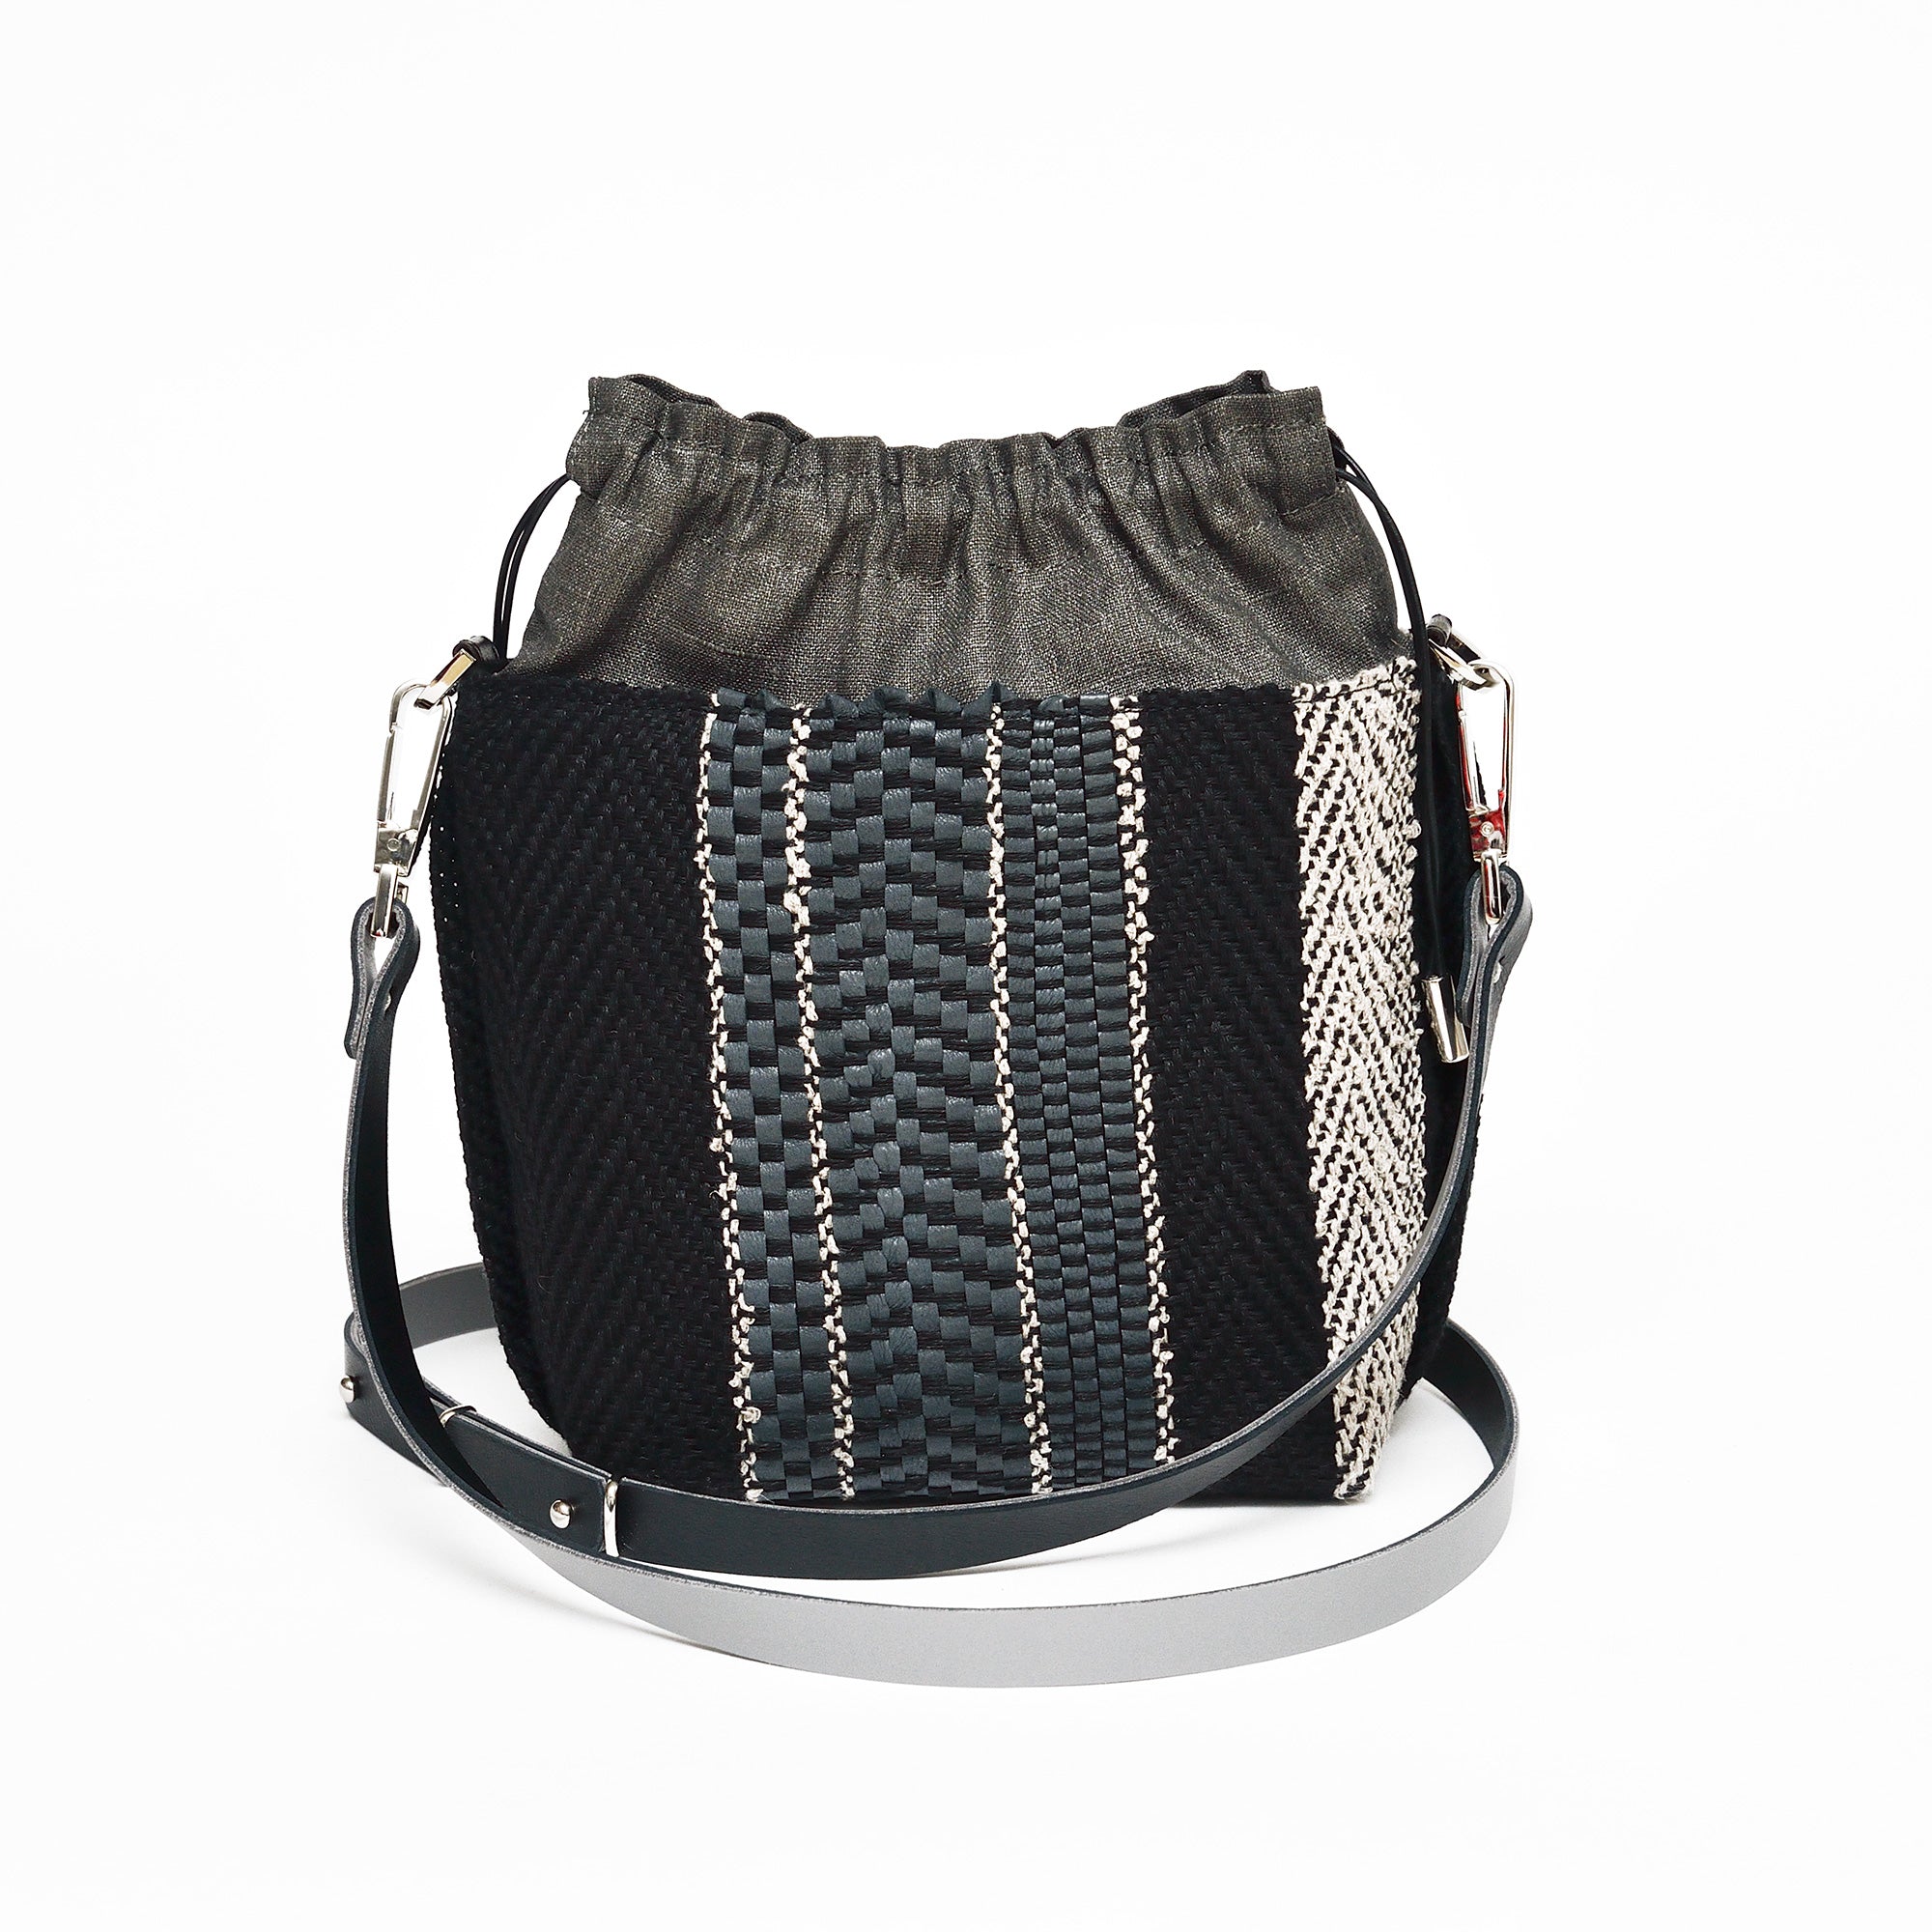 Handwoven Bag AUSTĖ #40 graphite grey leather and linen